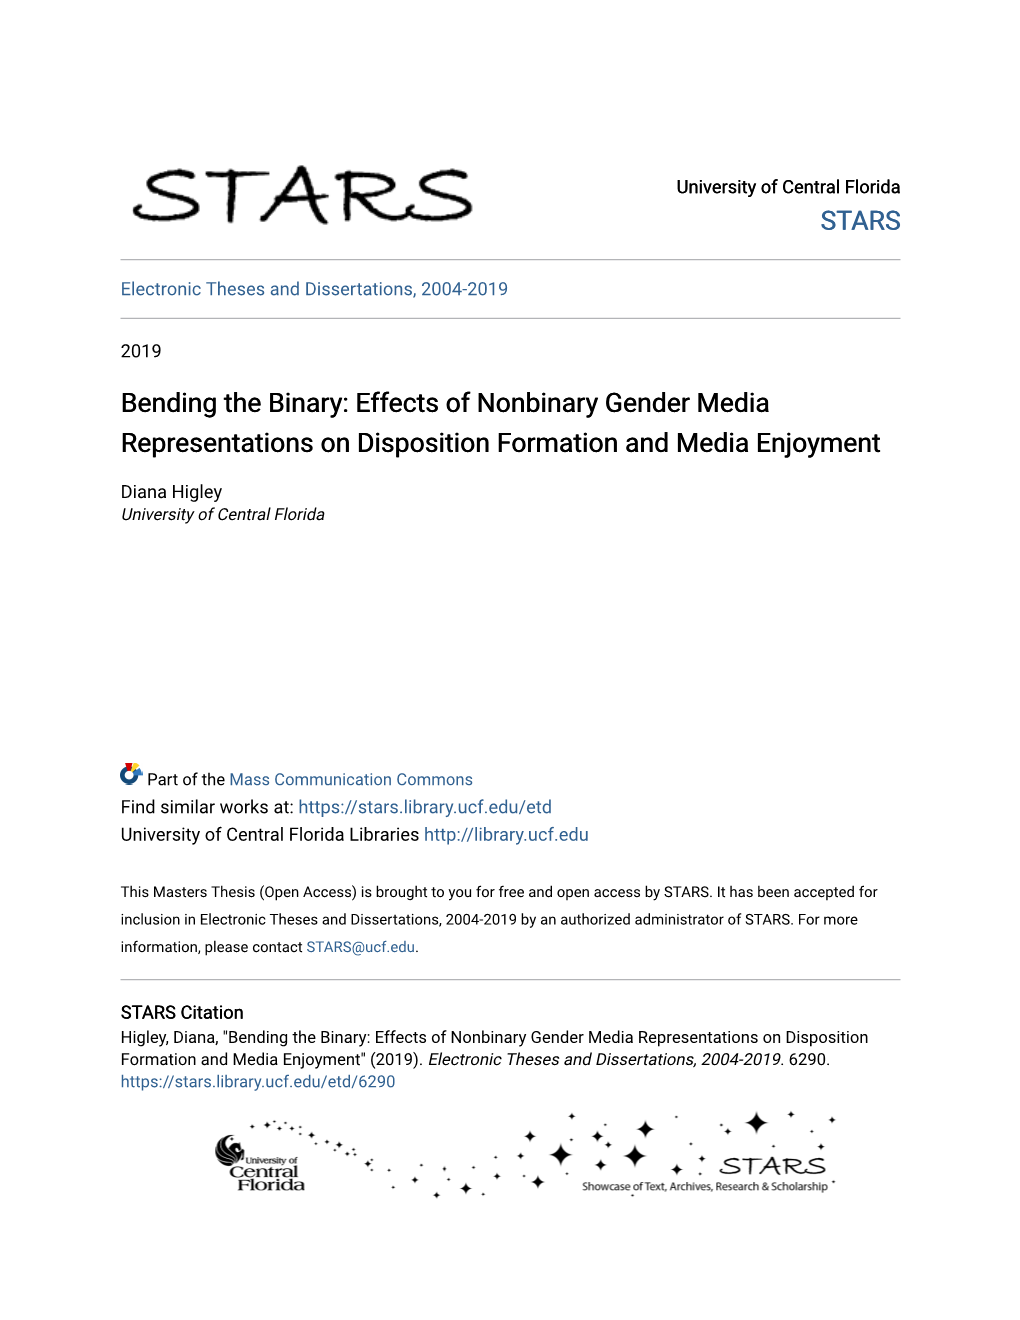 Bending the Binary: Effects of Nonbinary Gender Media Representations on Disposition Formation and Media Enjoyment